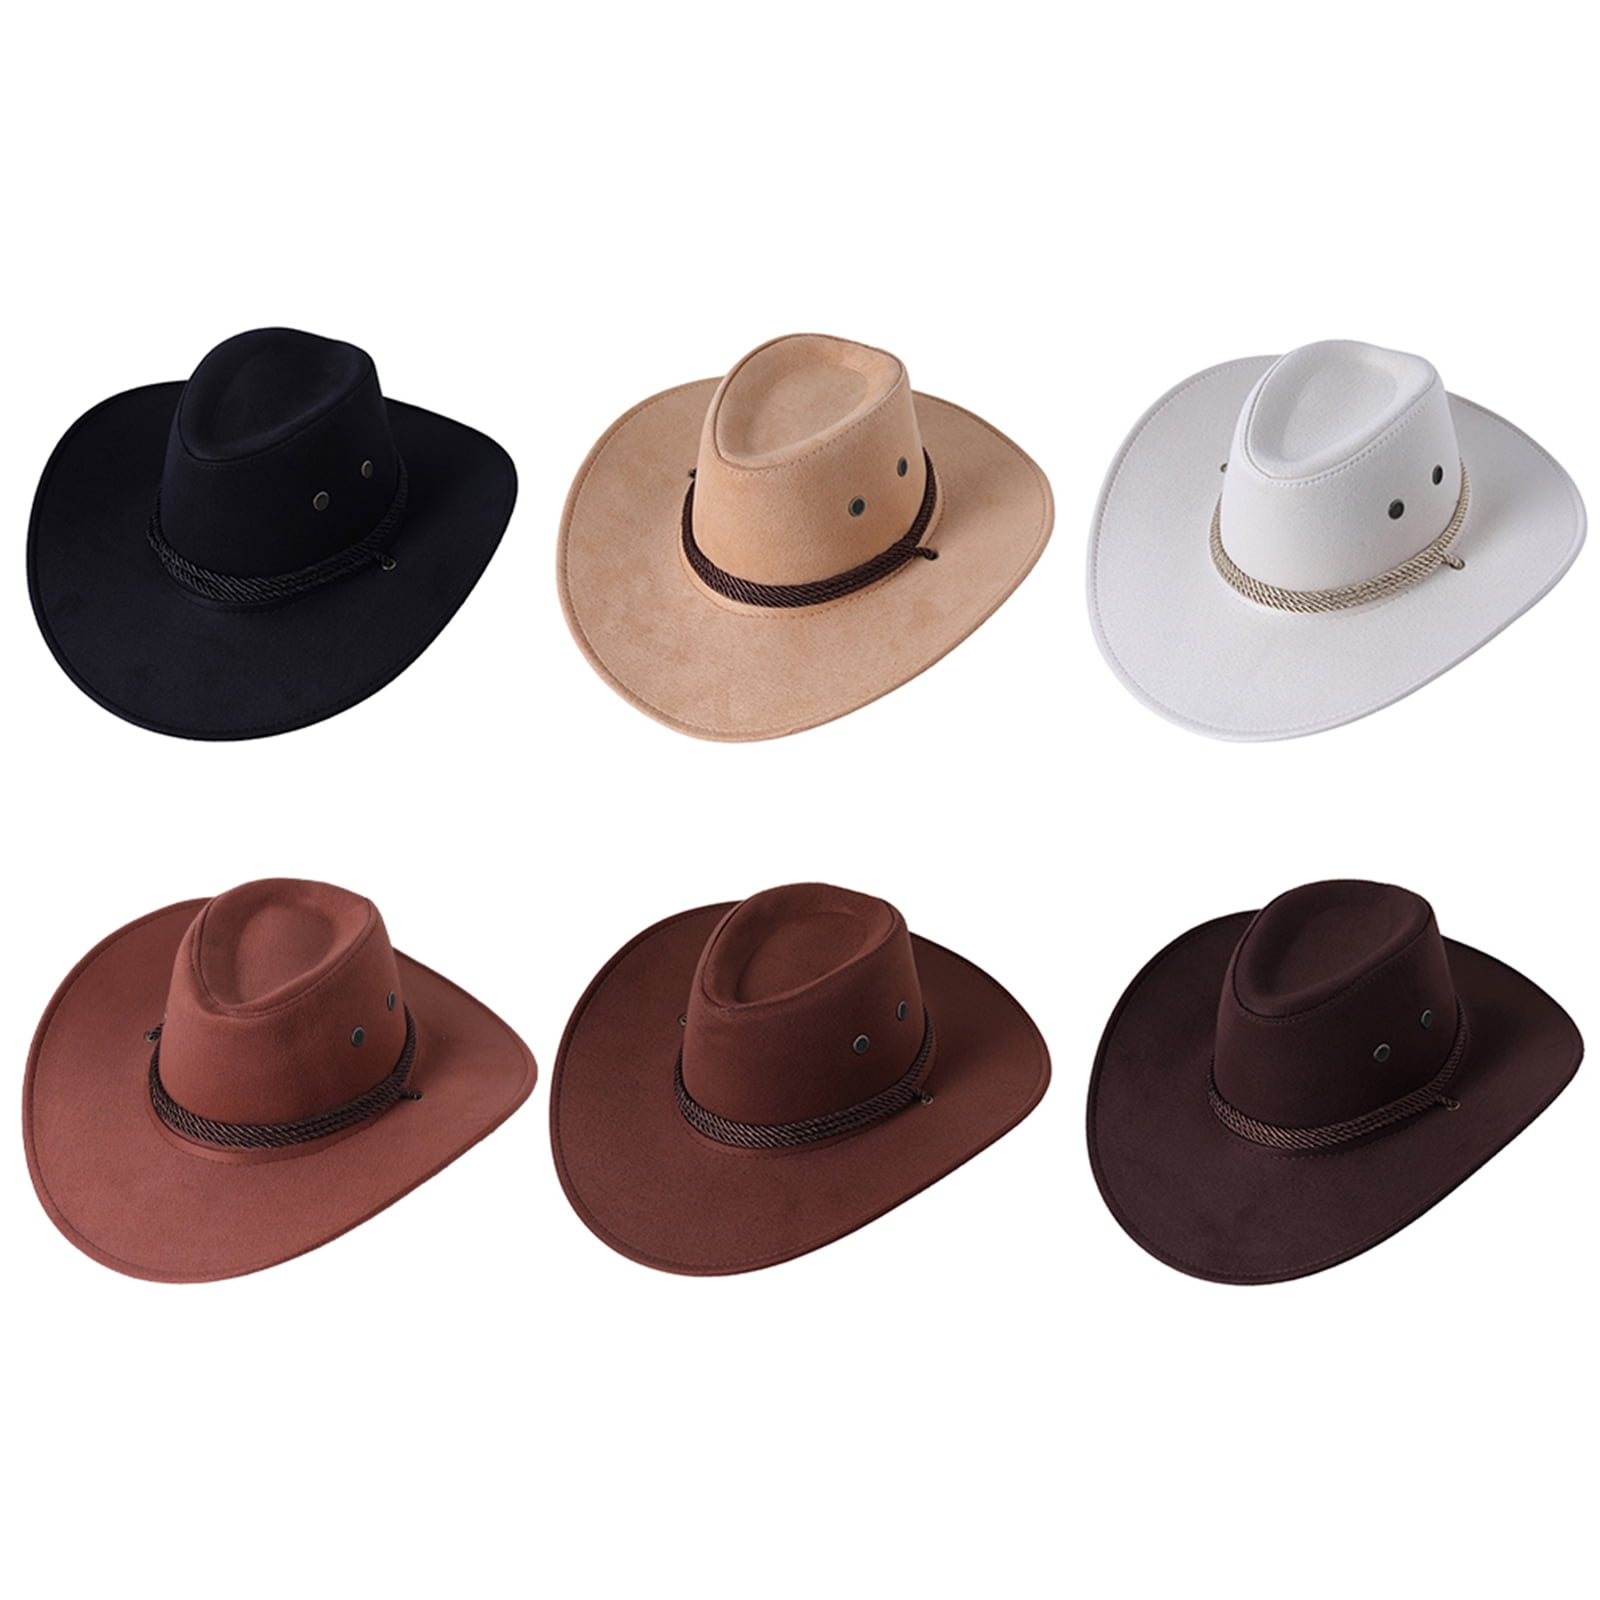 WoWstyle White Cowboy Hat for Adult Men Women Cowgirl Hat with Adjustable  Leather Hat Band Western Cattleman Cow Boy Rodeo Outfit for Outdoor  Activities, Parties, Farm-Related Events, Music Festivals 